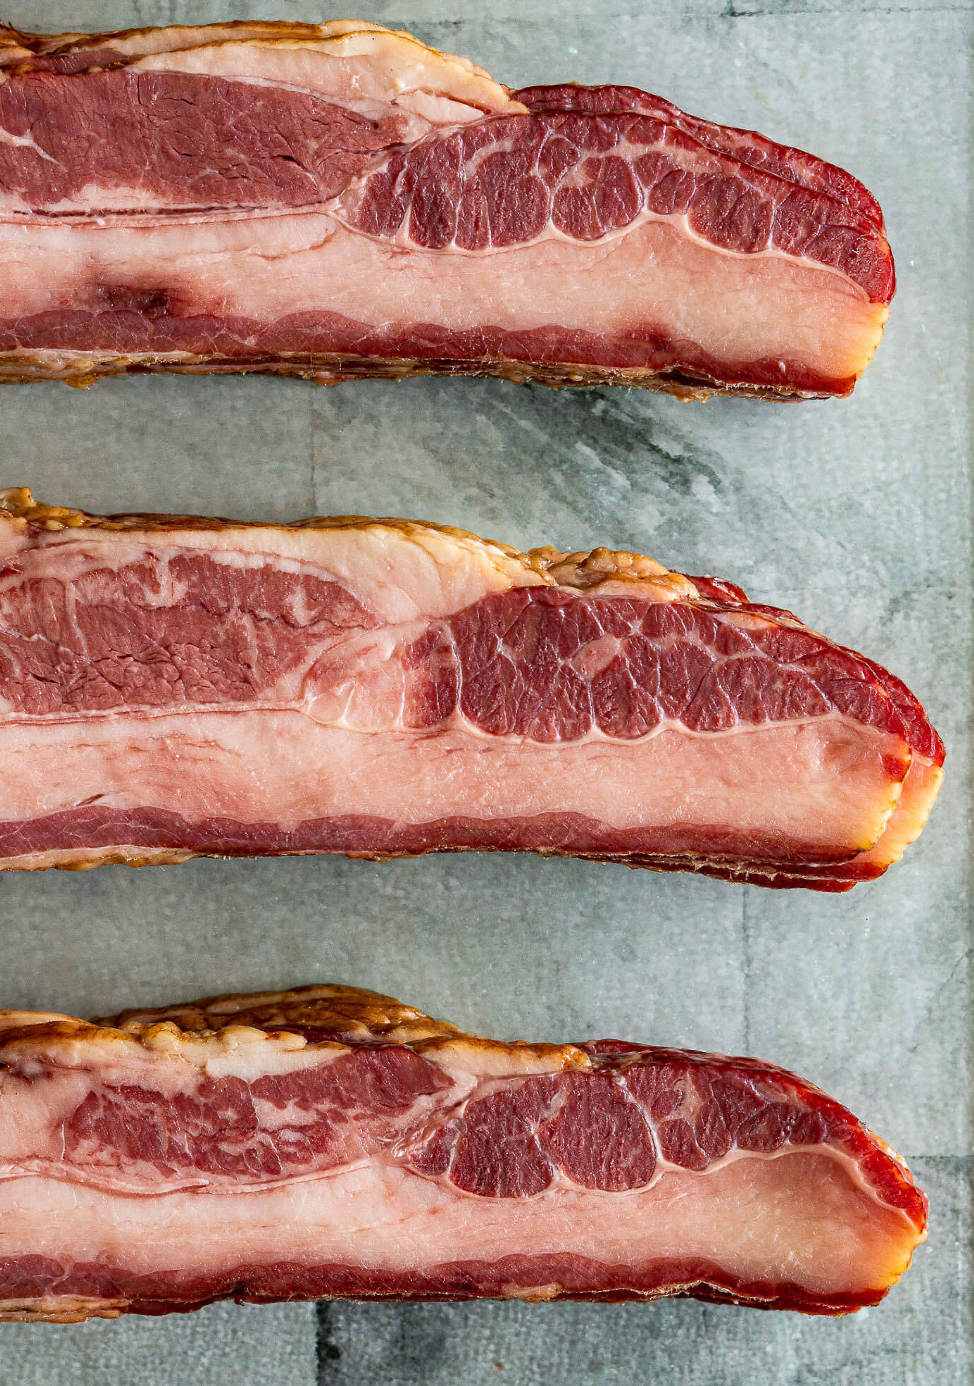 Spin-a-bone 3 pack - Bacon